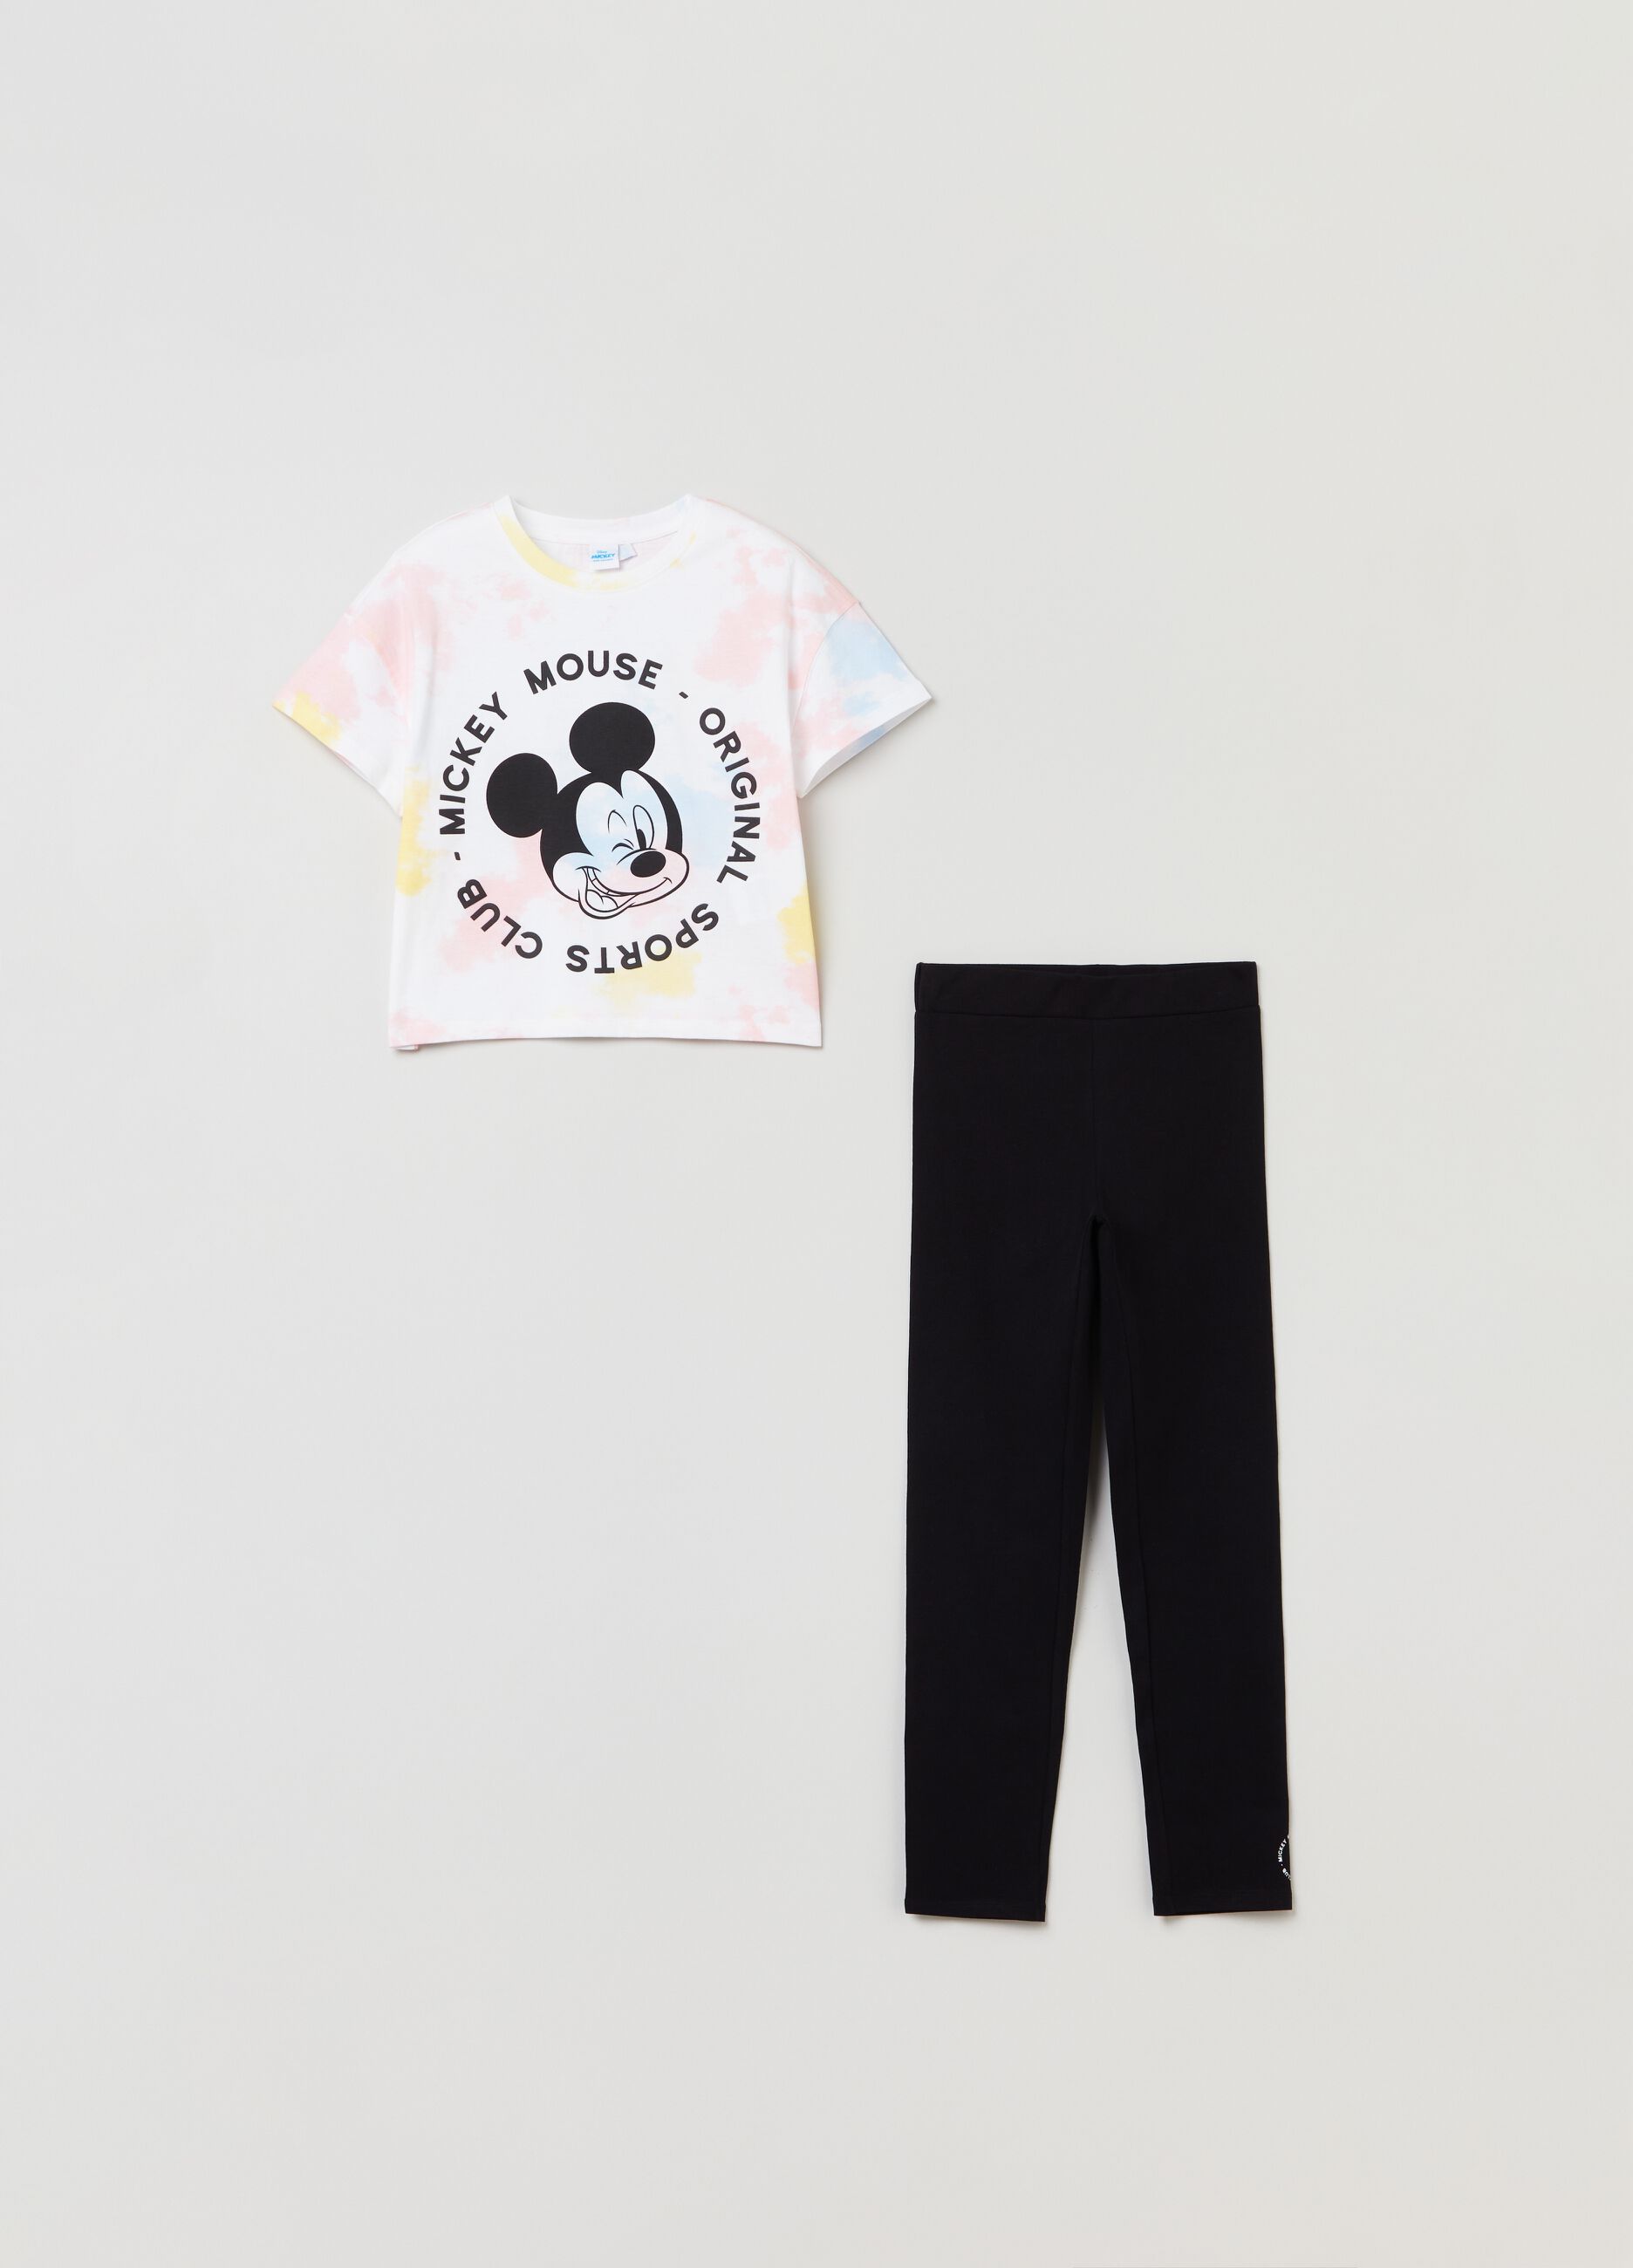 Jogging set with tie-dye T-shirt and Disney Mickey Mouse leggings